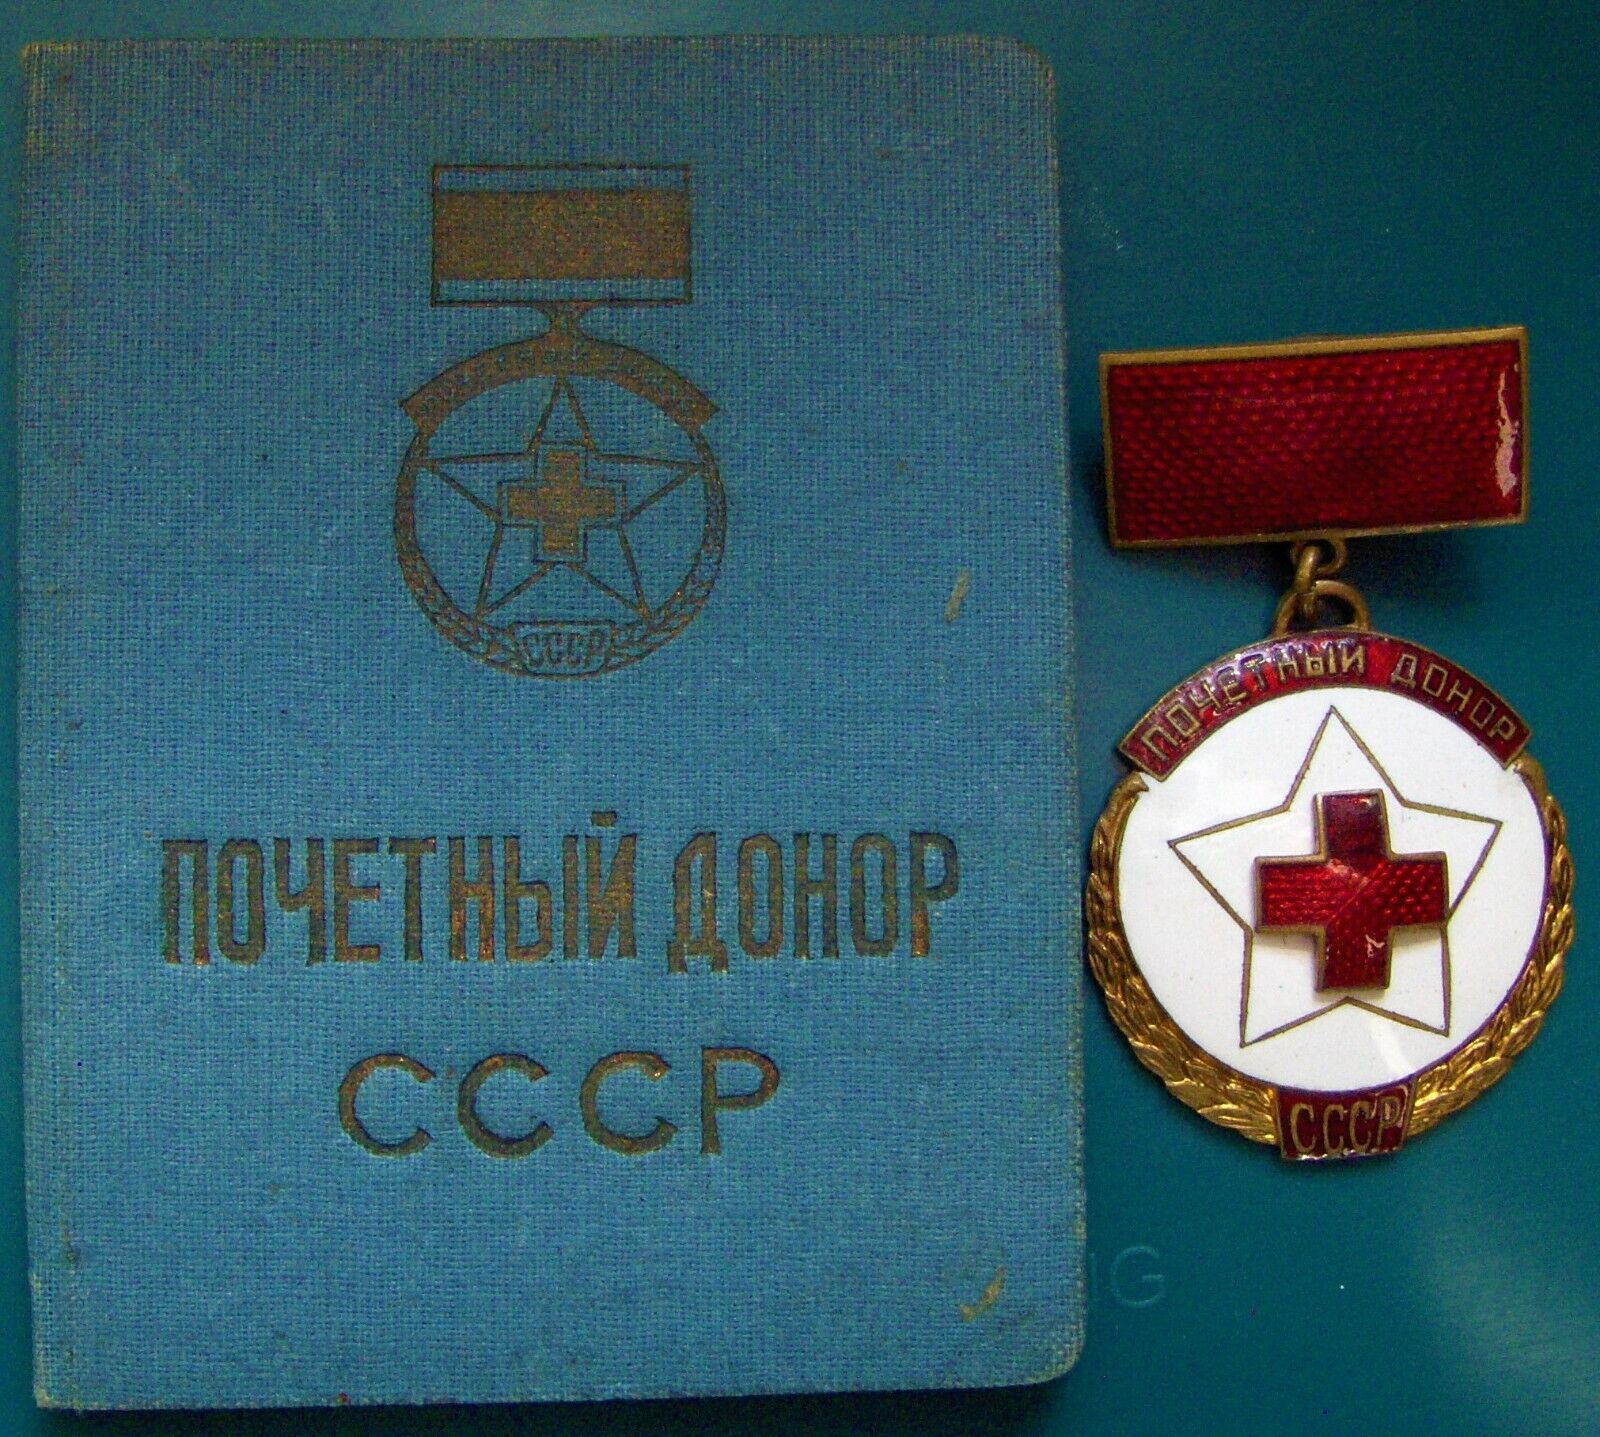 Original Russian Honored Blood Donor medal with Booklet-Certificate, 1951